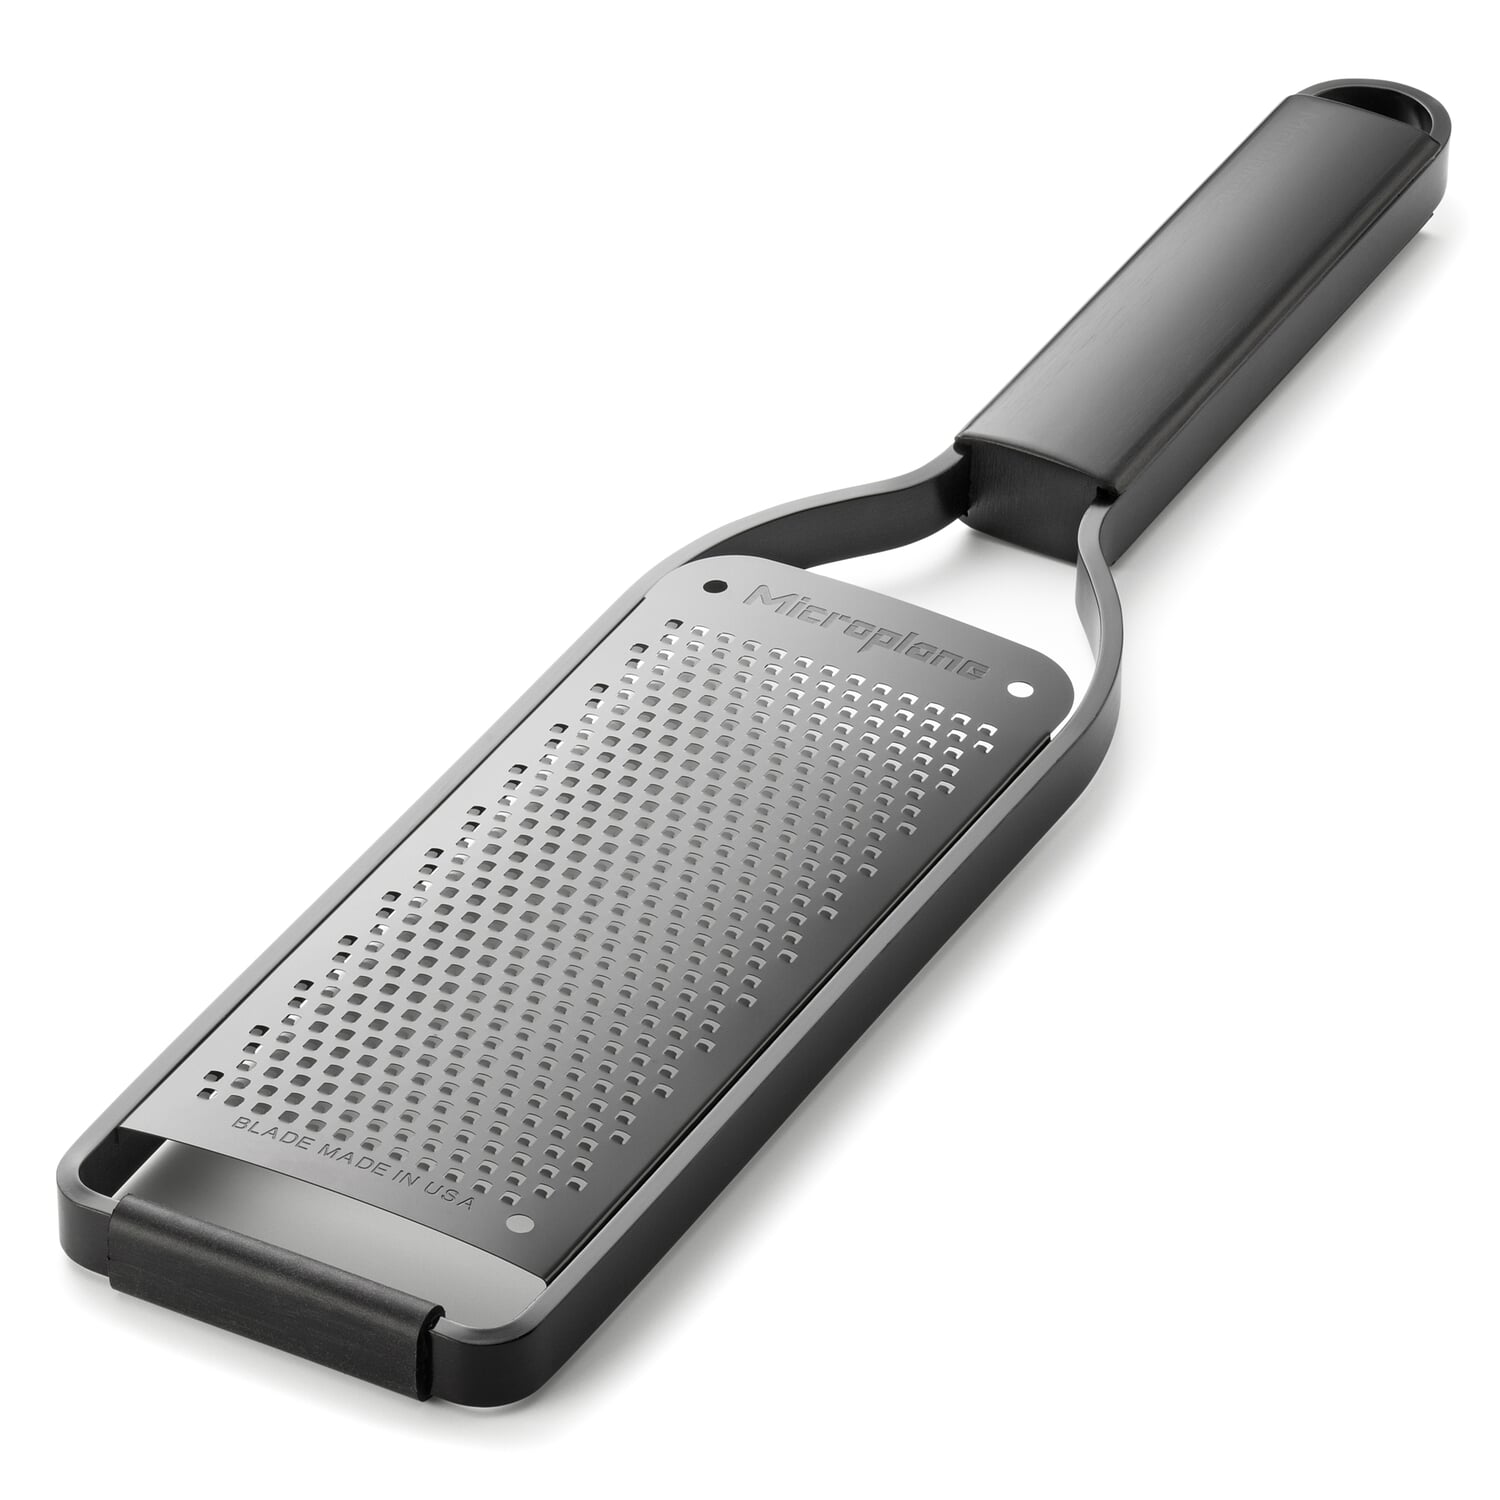 Microplane Fine Cheese Grater